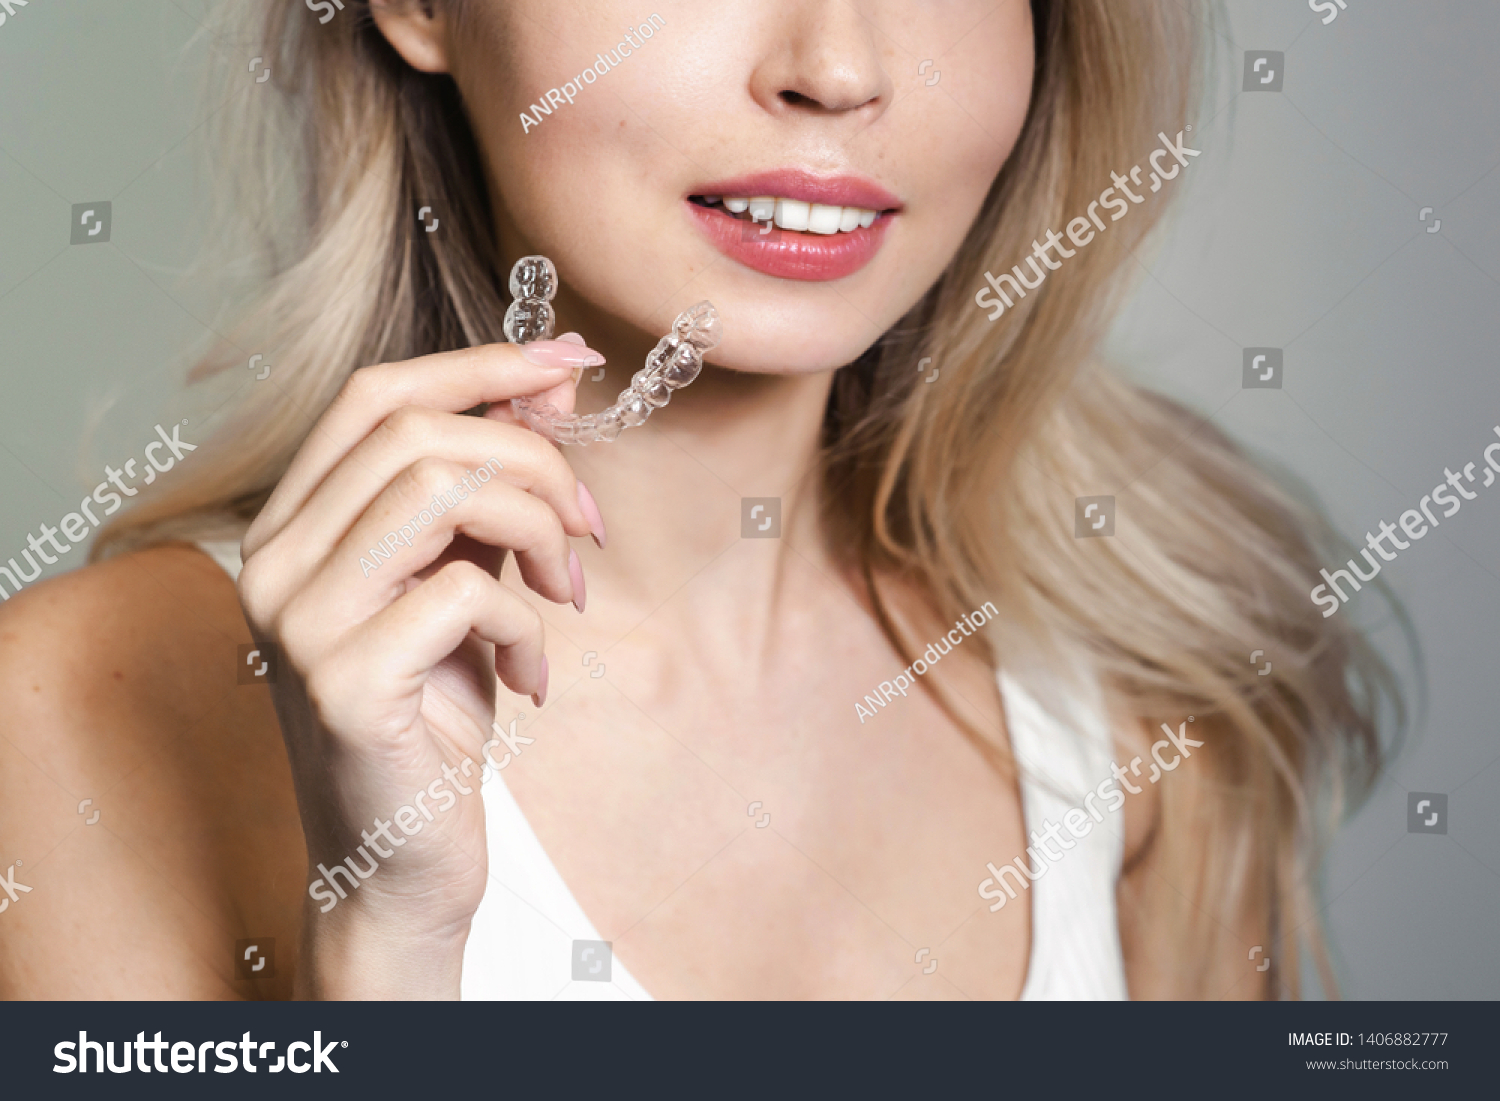 A smiling woman holding invisalign or invisible braces, orthodontic equipment. Teeth aligner for young girl. Dentistry beautiful smile concept #1406882777